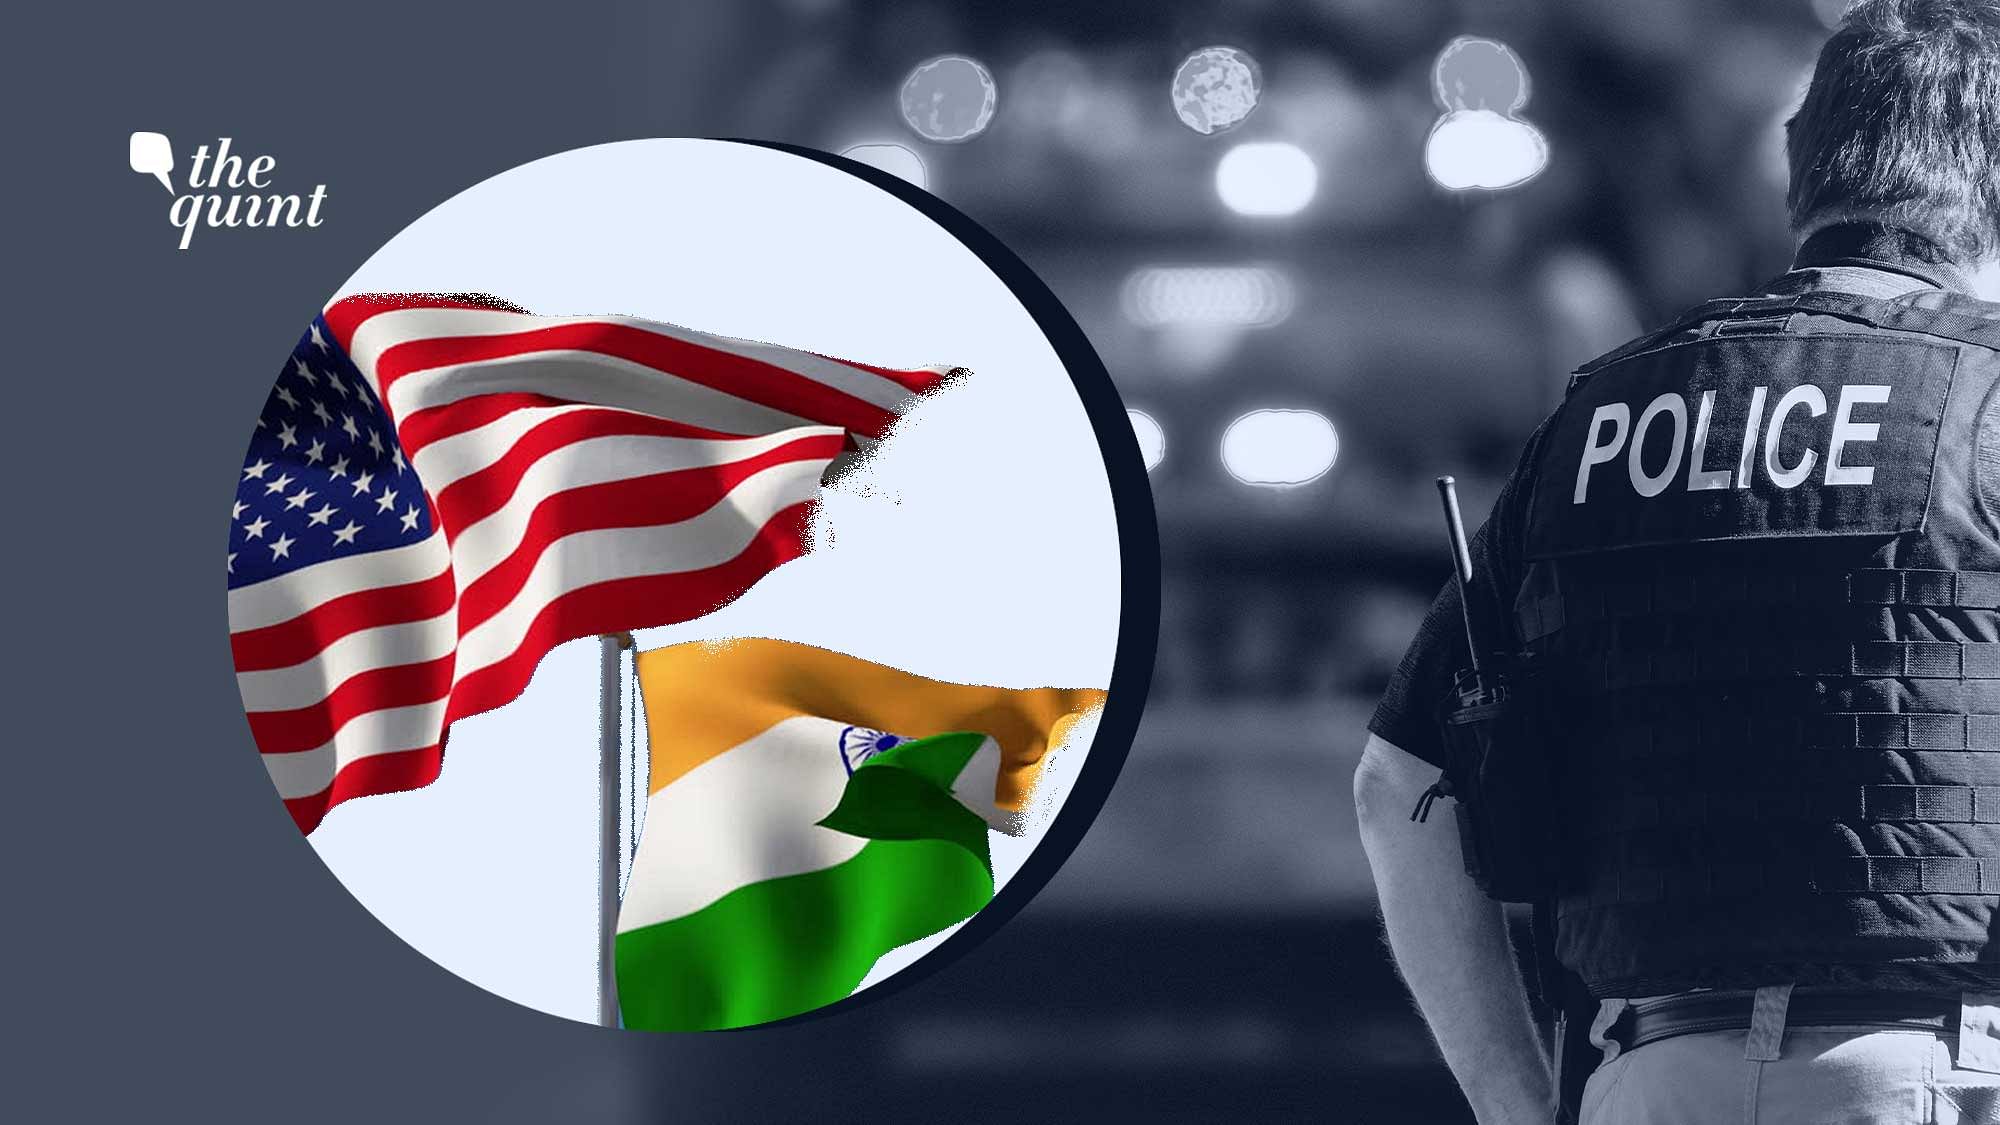 Image of Indian and American flags used for representational purposes. Police, security have been ramped up around the US amid elections and anticipation of violence.